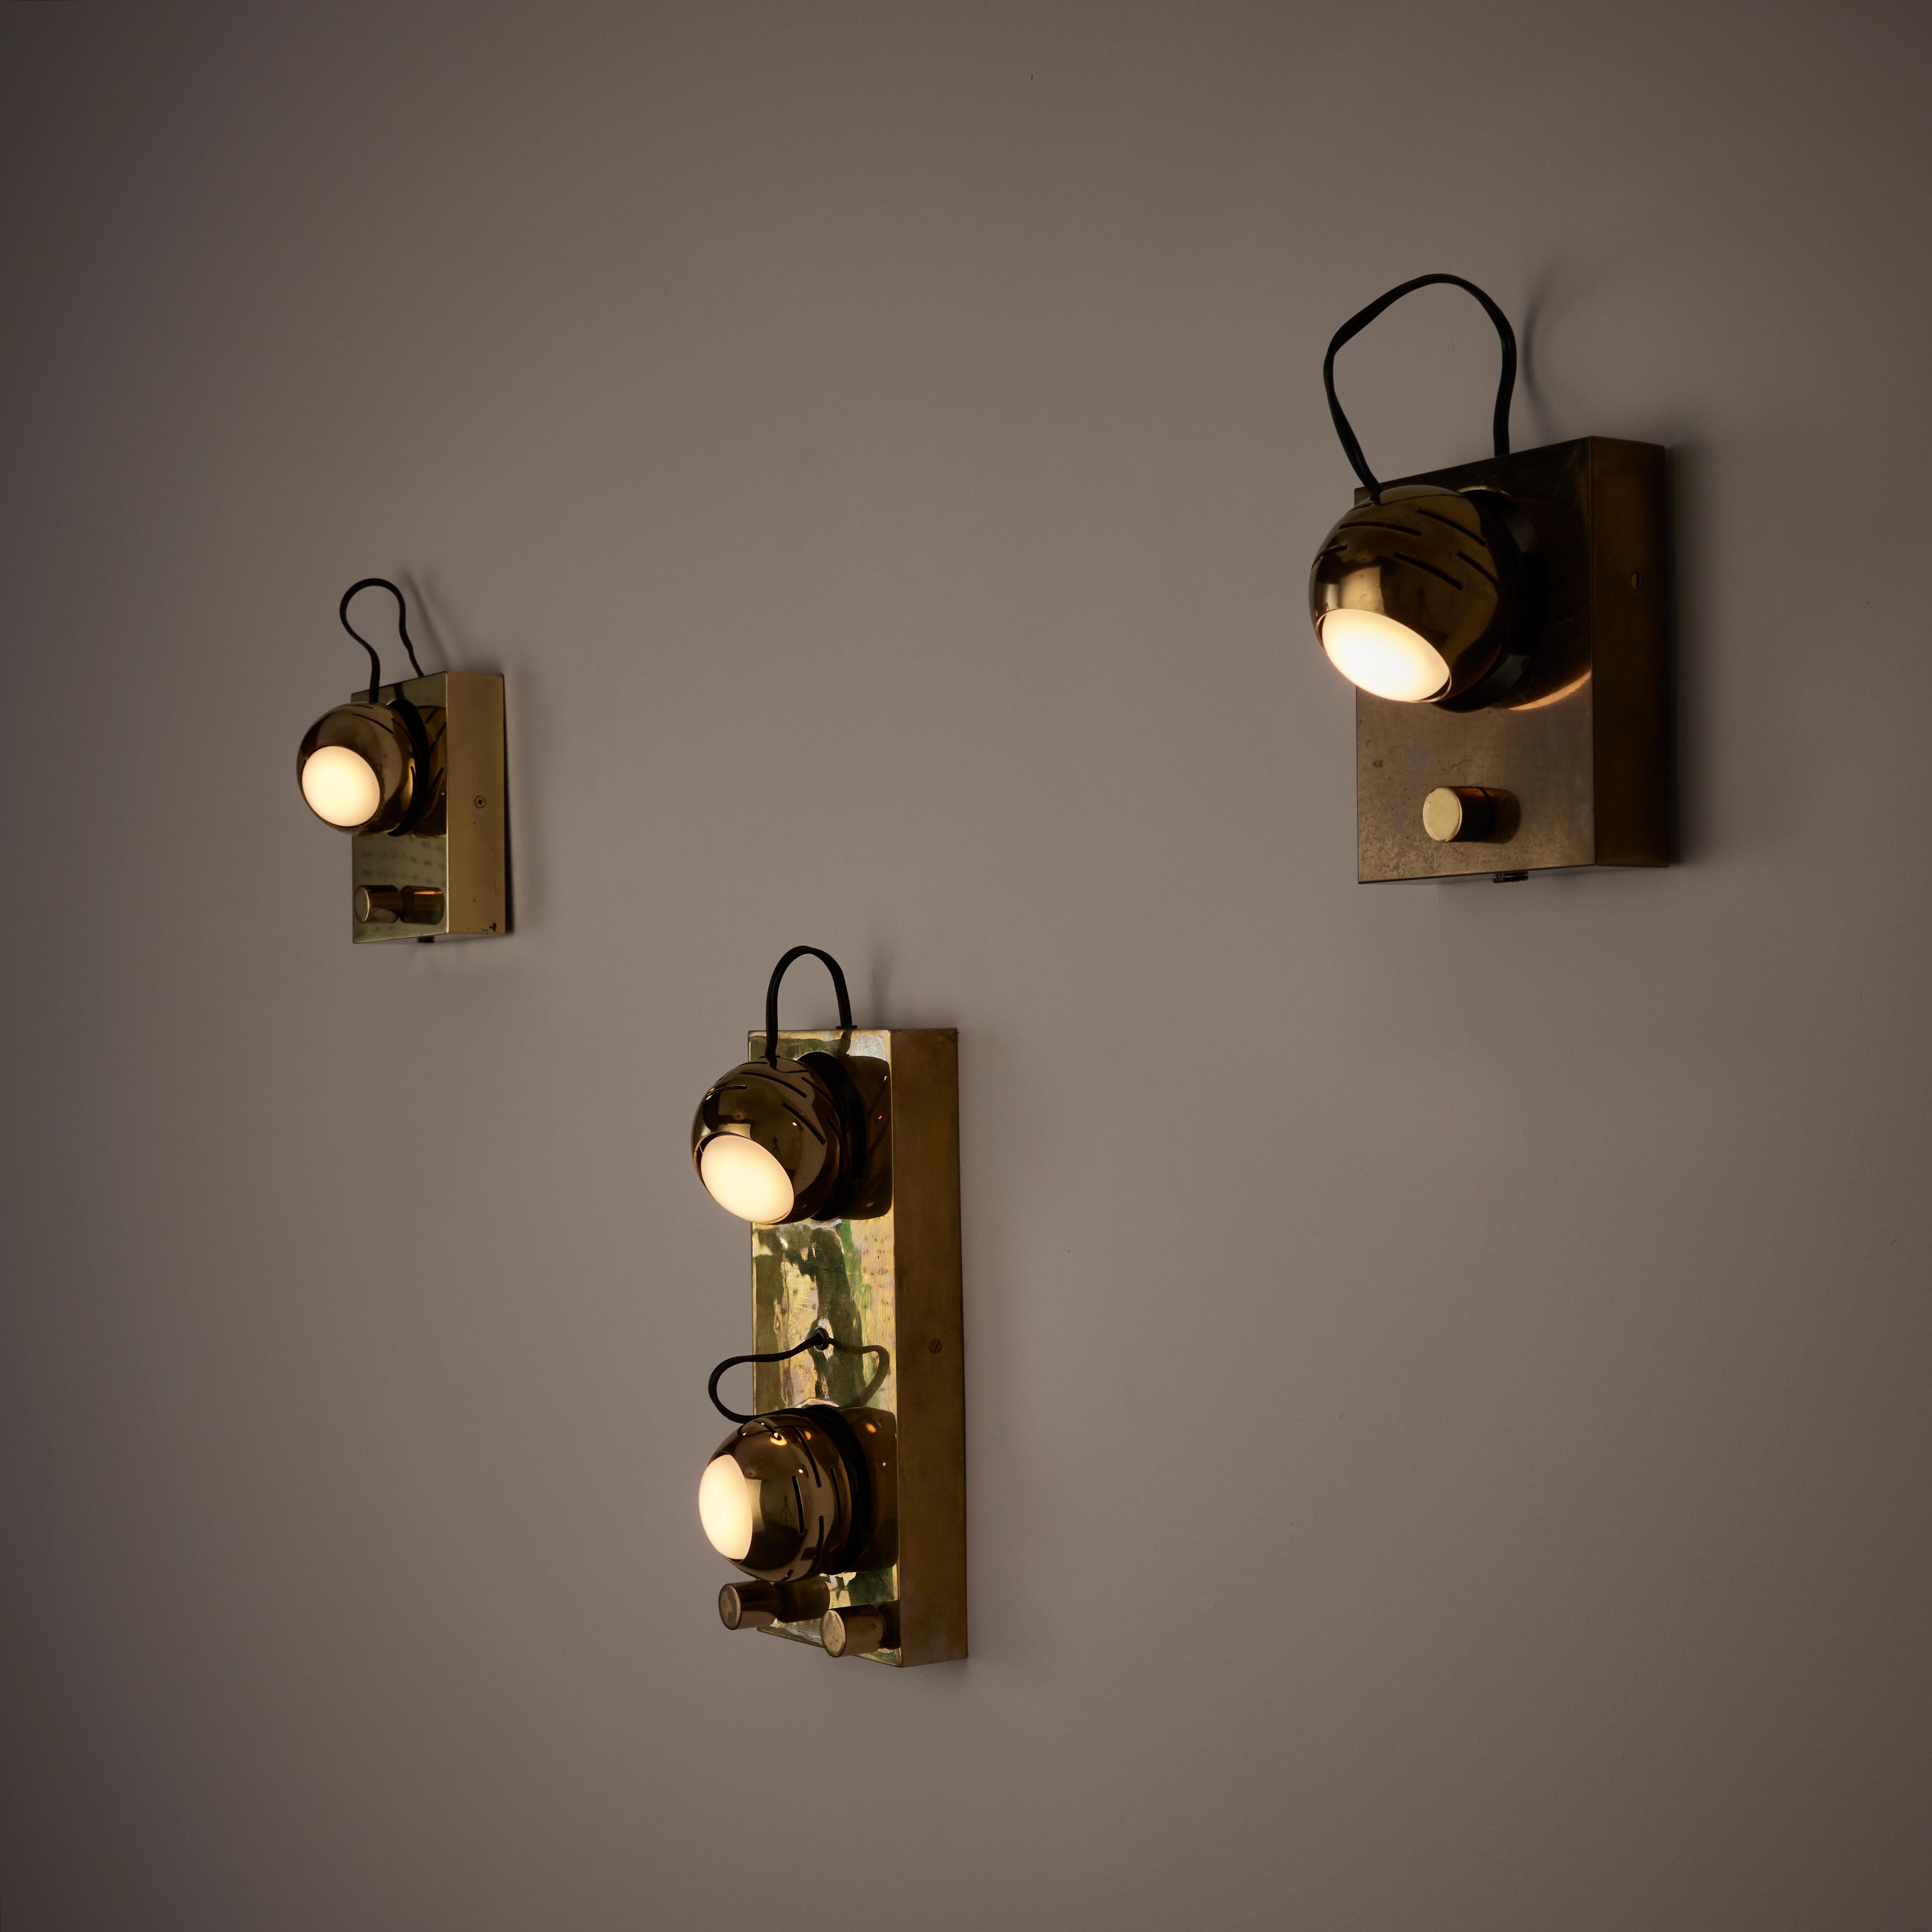 Eyeball Sconces by Angelo Lelli for Arredoluce. Designed and manufactured in Italy, circa 1960. Brass sconces with fully anatomical bulb sockets. We recommend using a 40w maximum R14 medium base LED Light Bulb. Rewired for US standards. Bulb